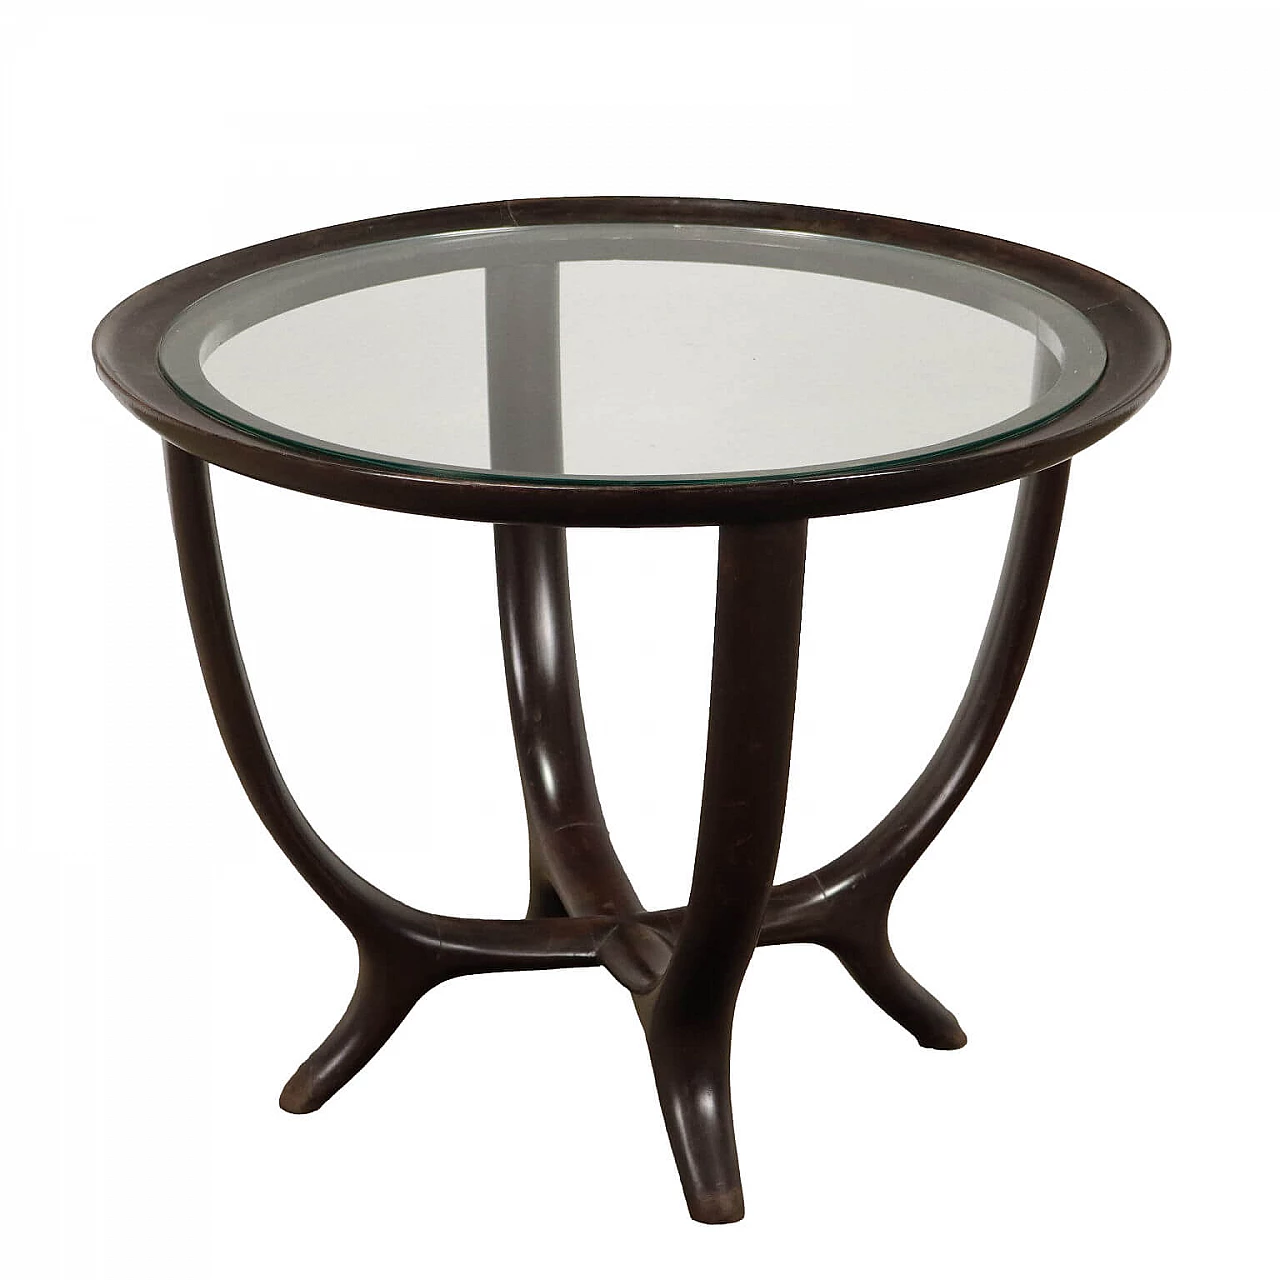 Ebony-stained wooden coffee table with glass top, 1950s 1